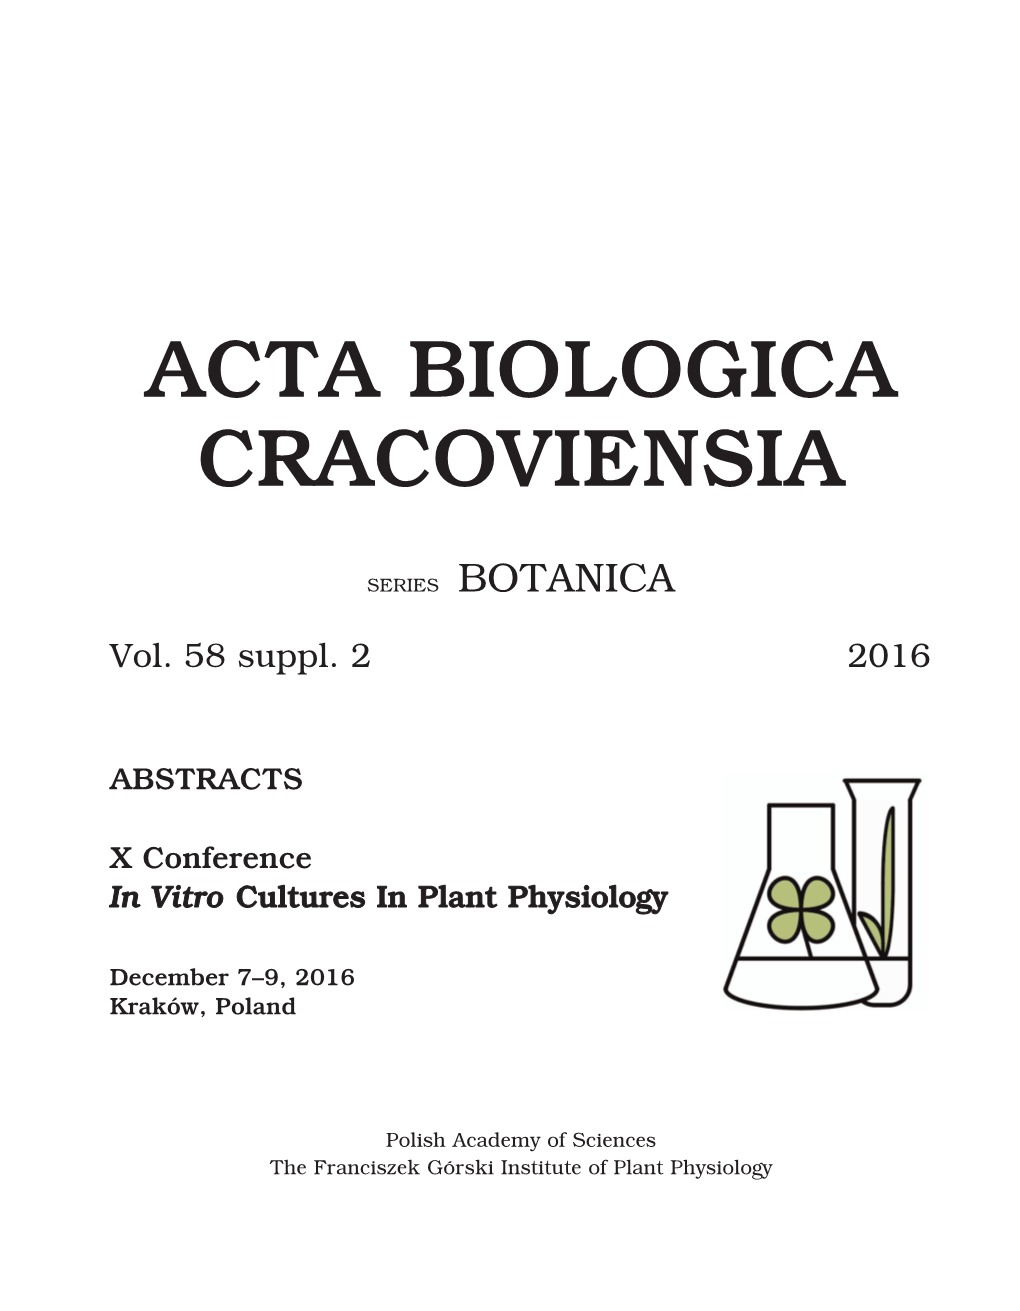 In Vitro Cultures in Plant Physiology